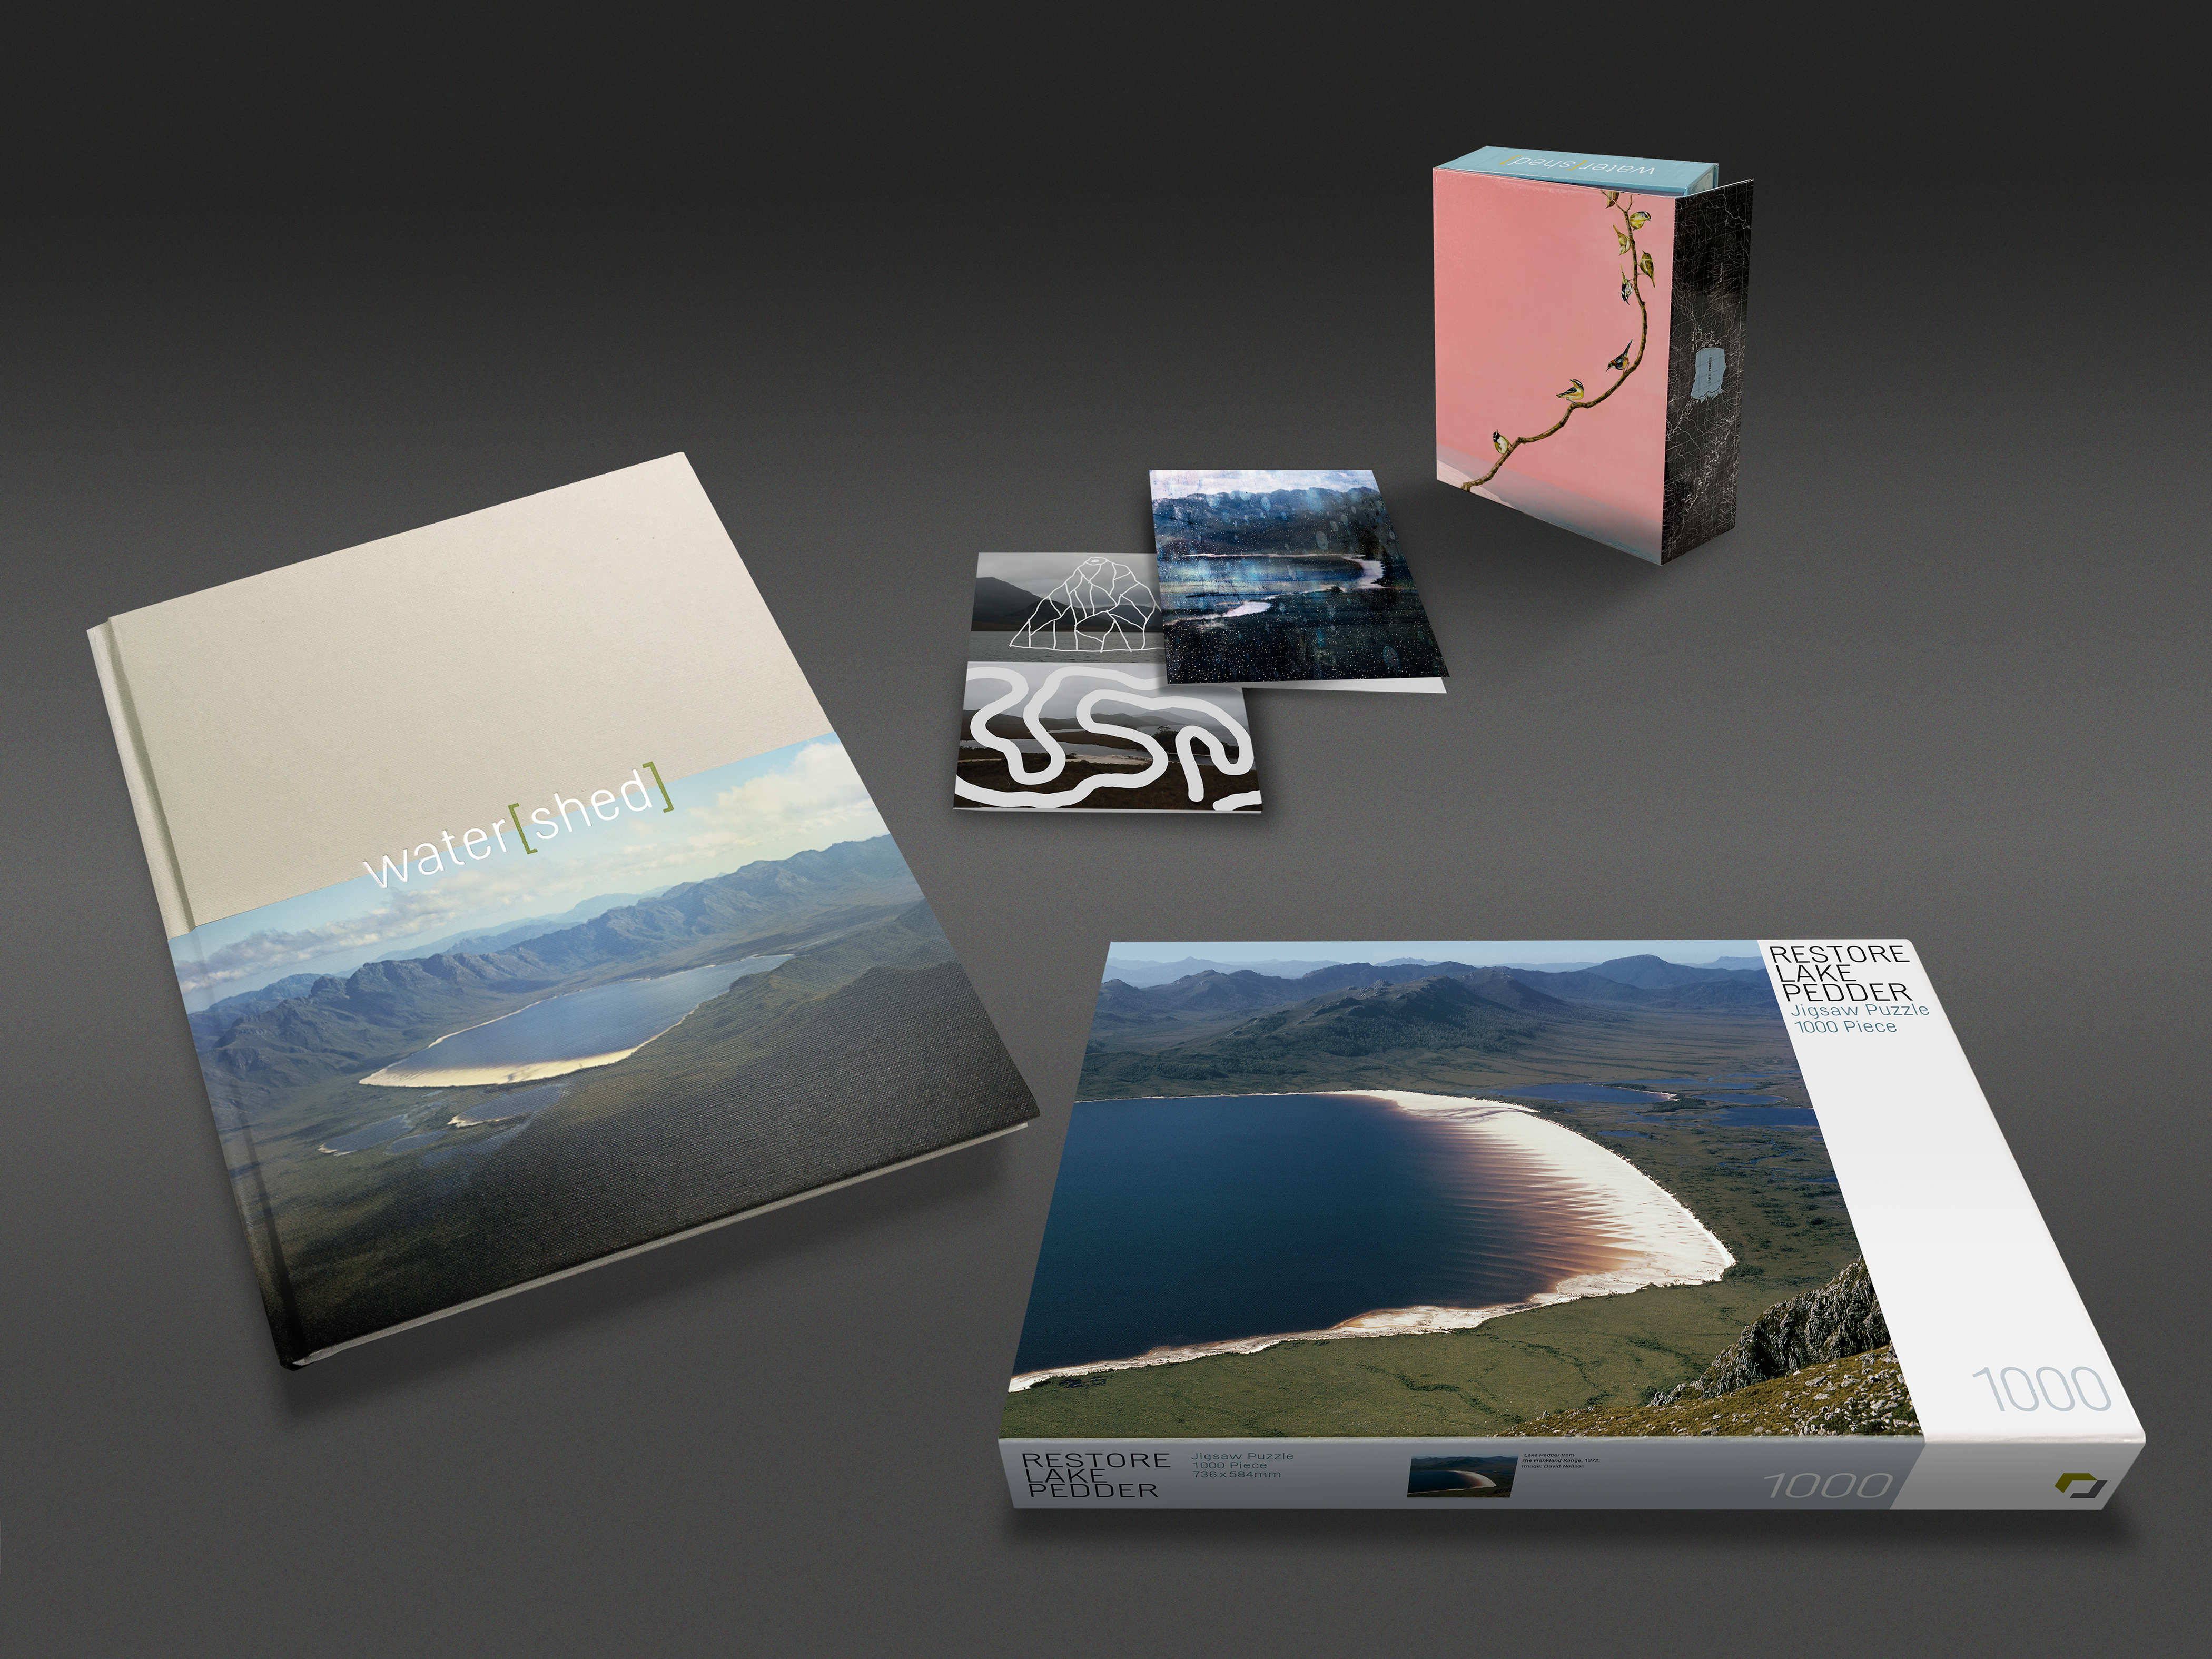 A composite image of water[shed] project campaign merchandise including the book (at left), the jigsaw (at right) and the boxed card set with two of the cards (at back).